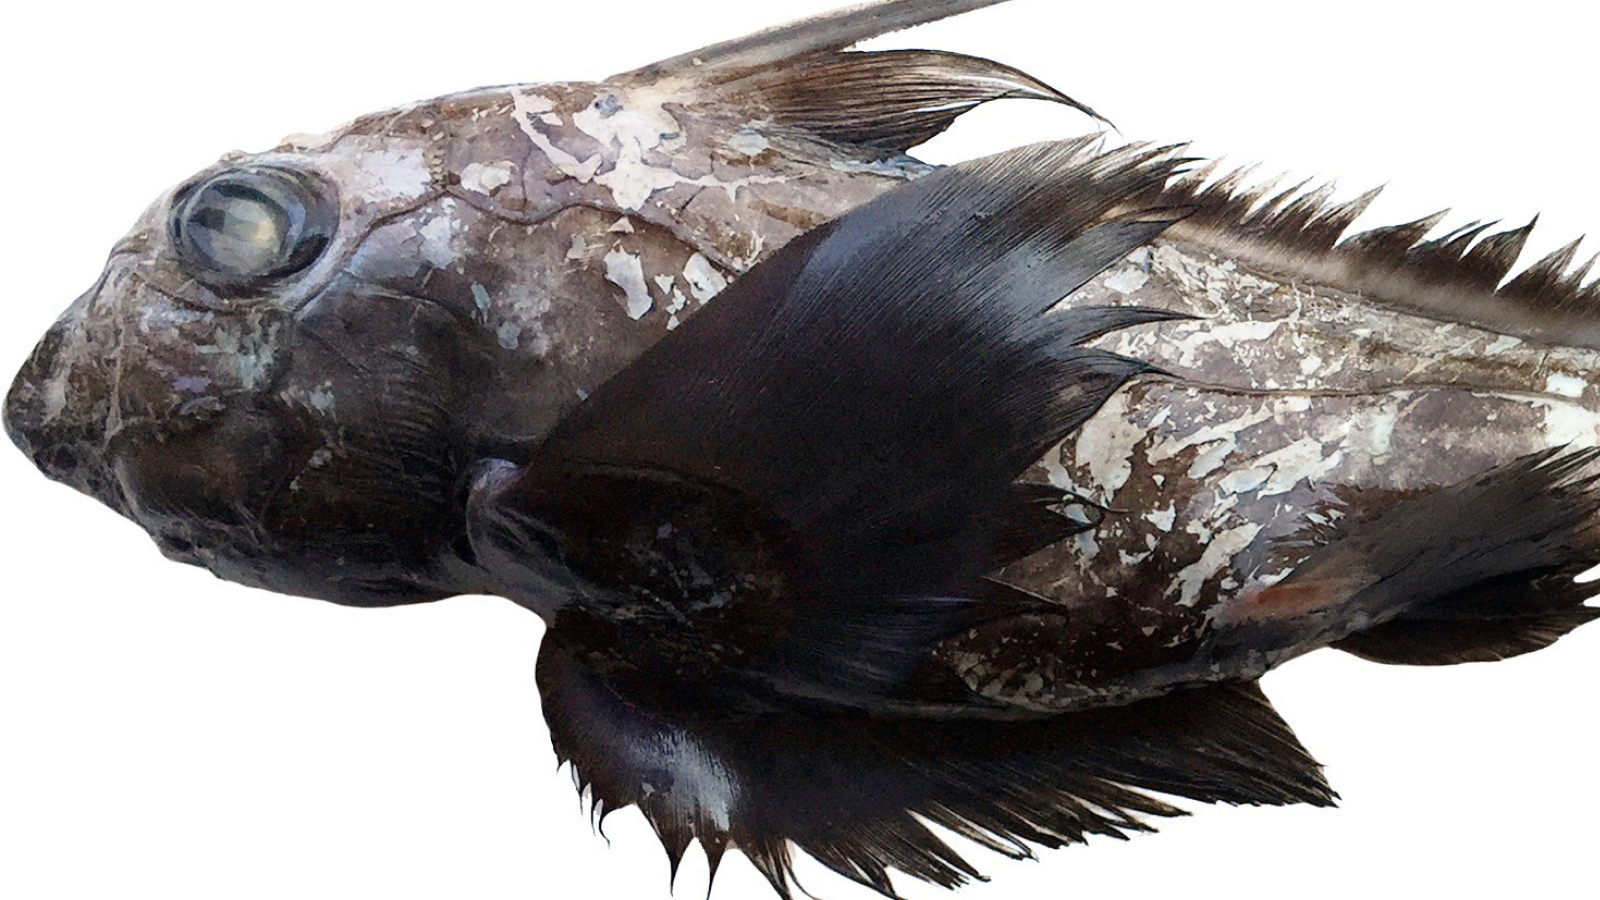 Cropped side profile of the anterior portion of the new species of ghost shark found in Thailand; bulging eyes, brown skin and feathered fins.